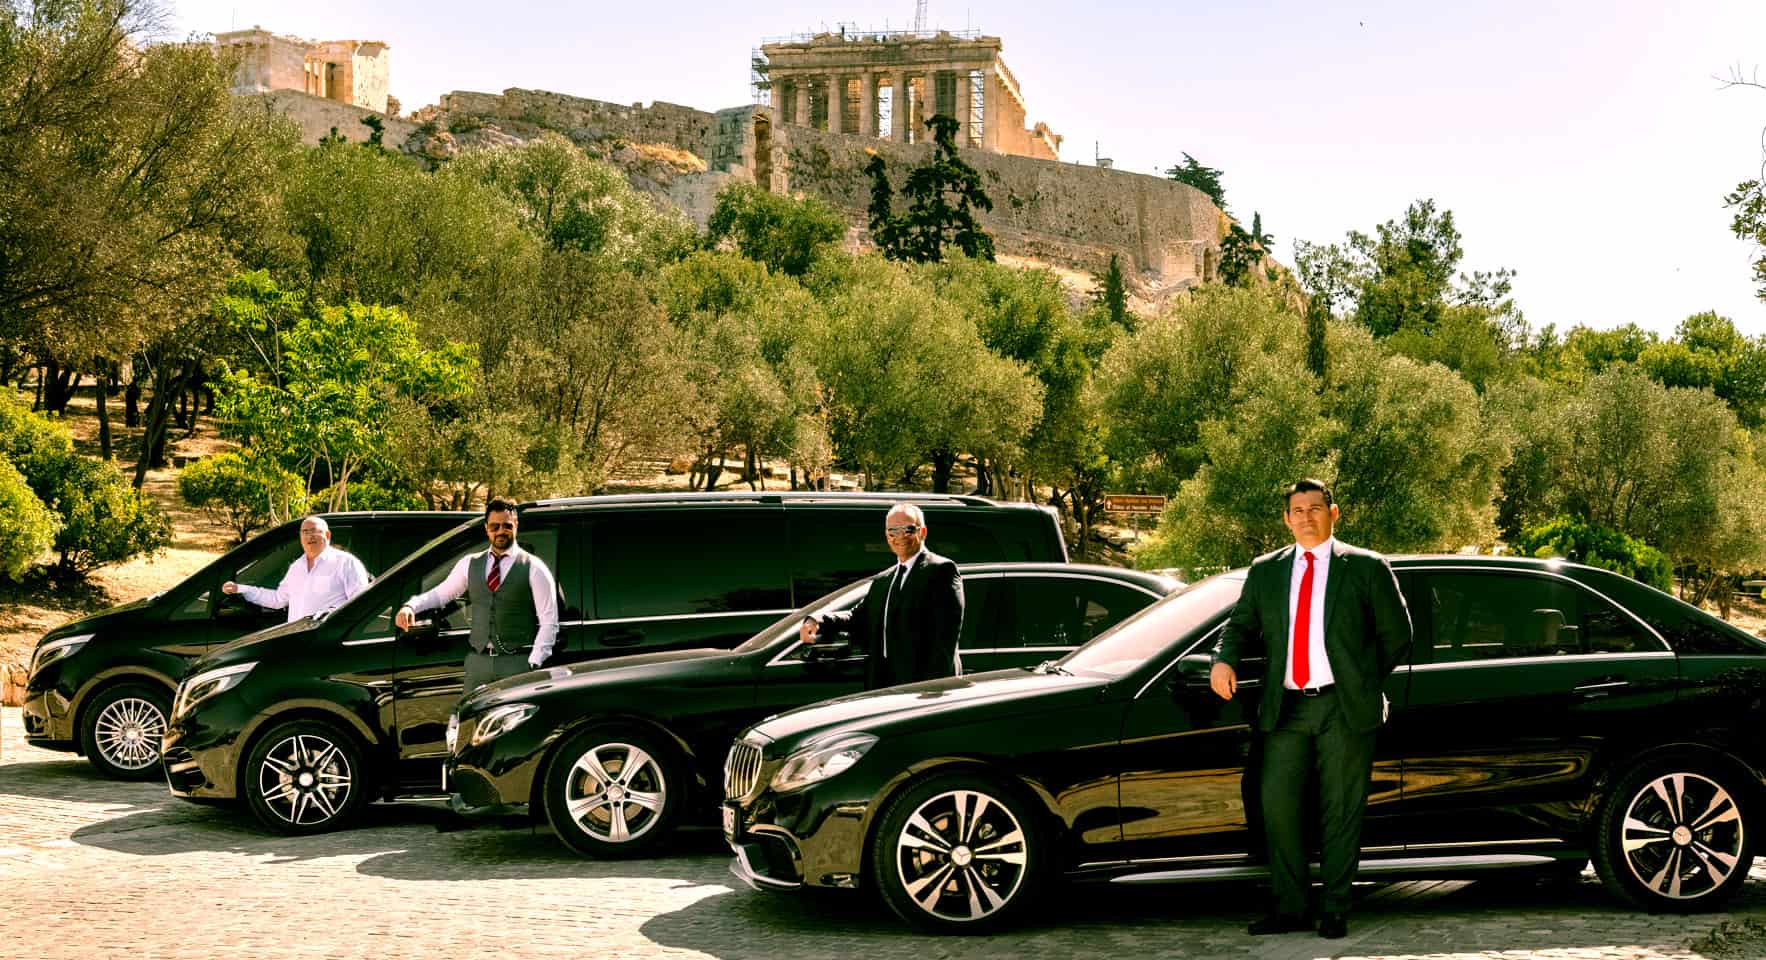 Holiday Vacation Packages Greece with mercedes sedan and minivans